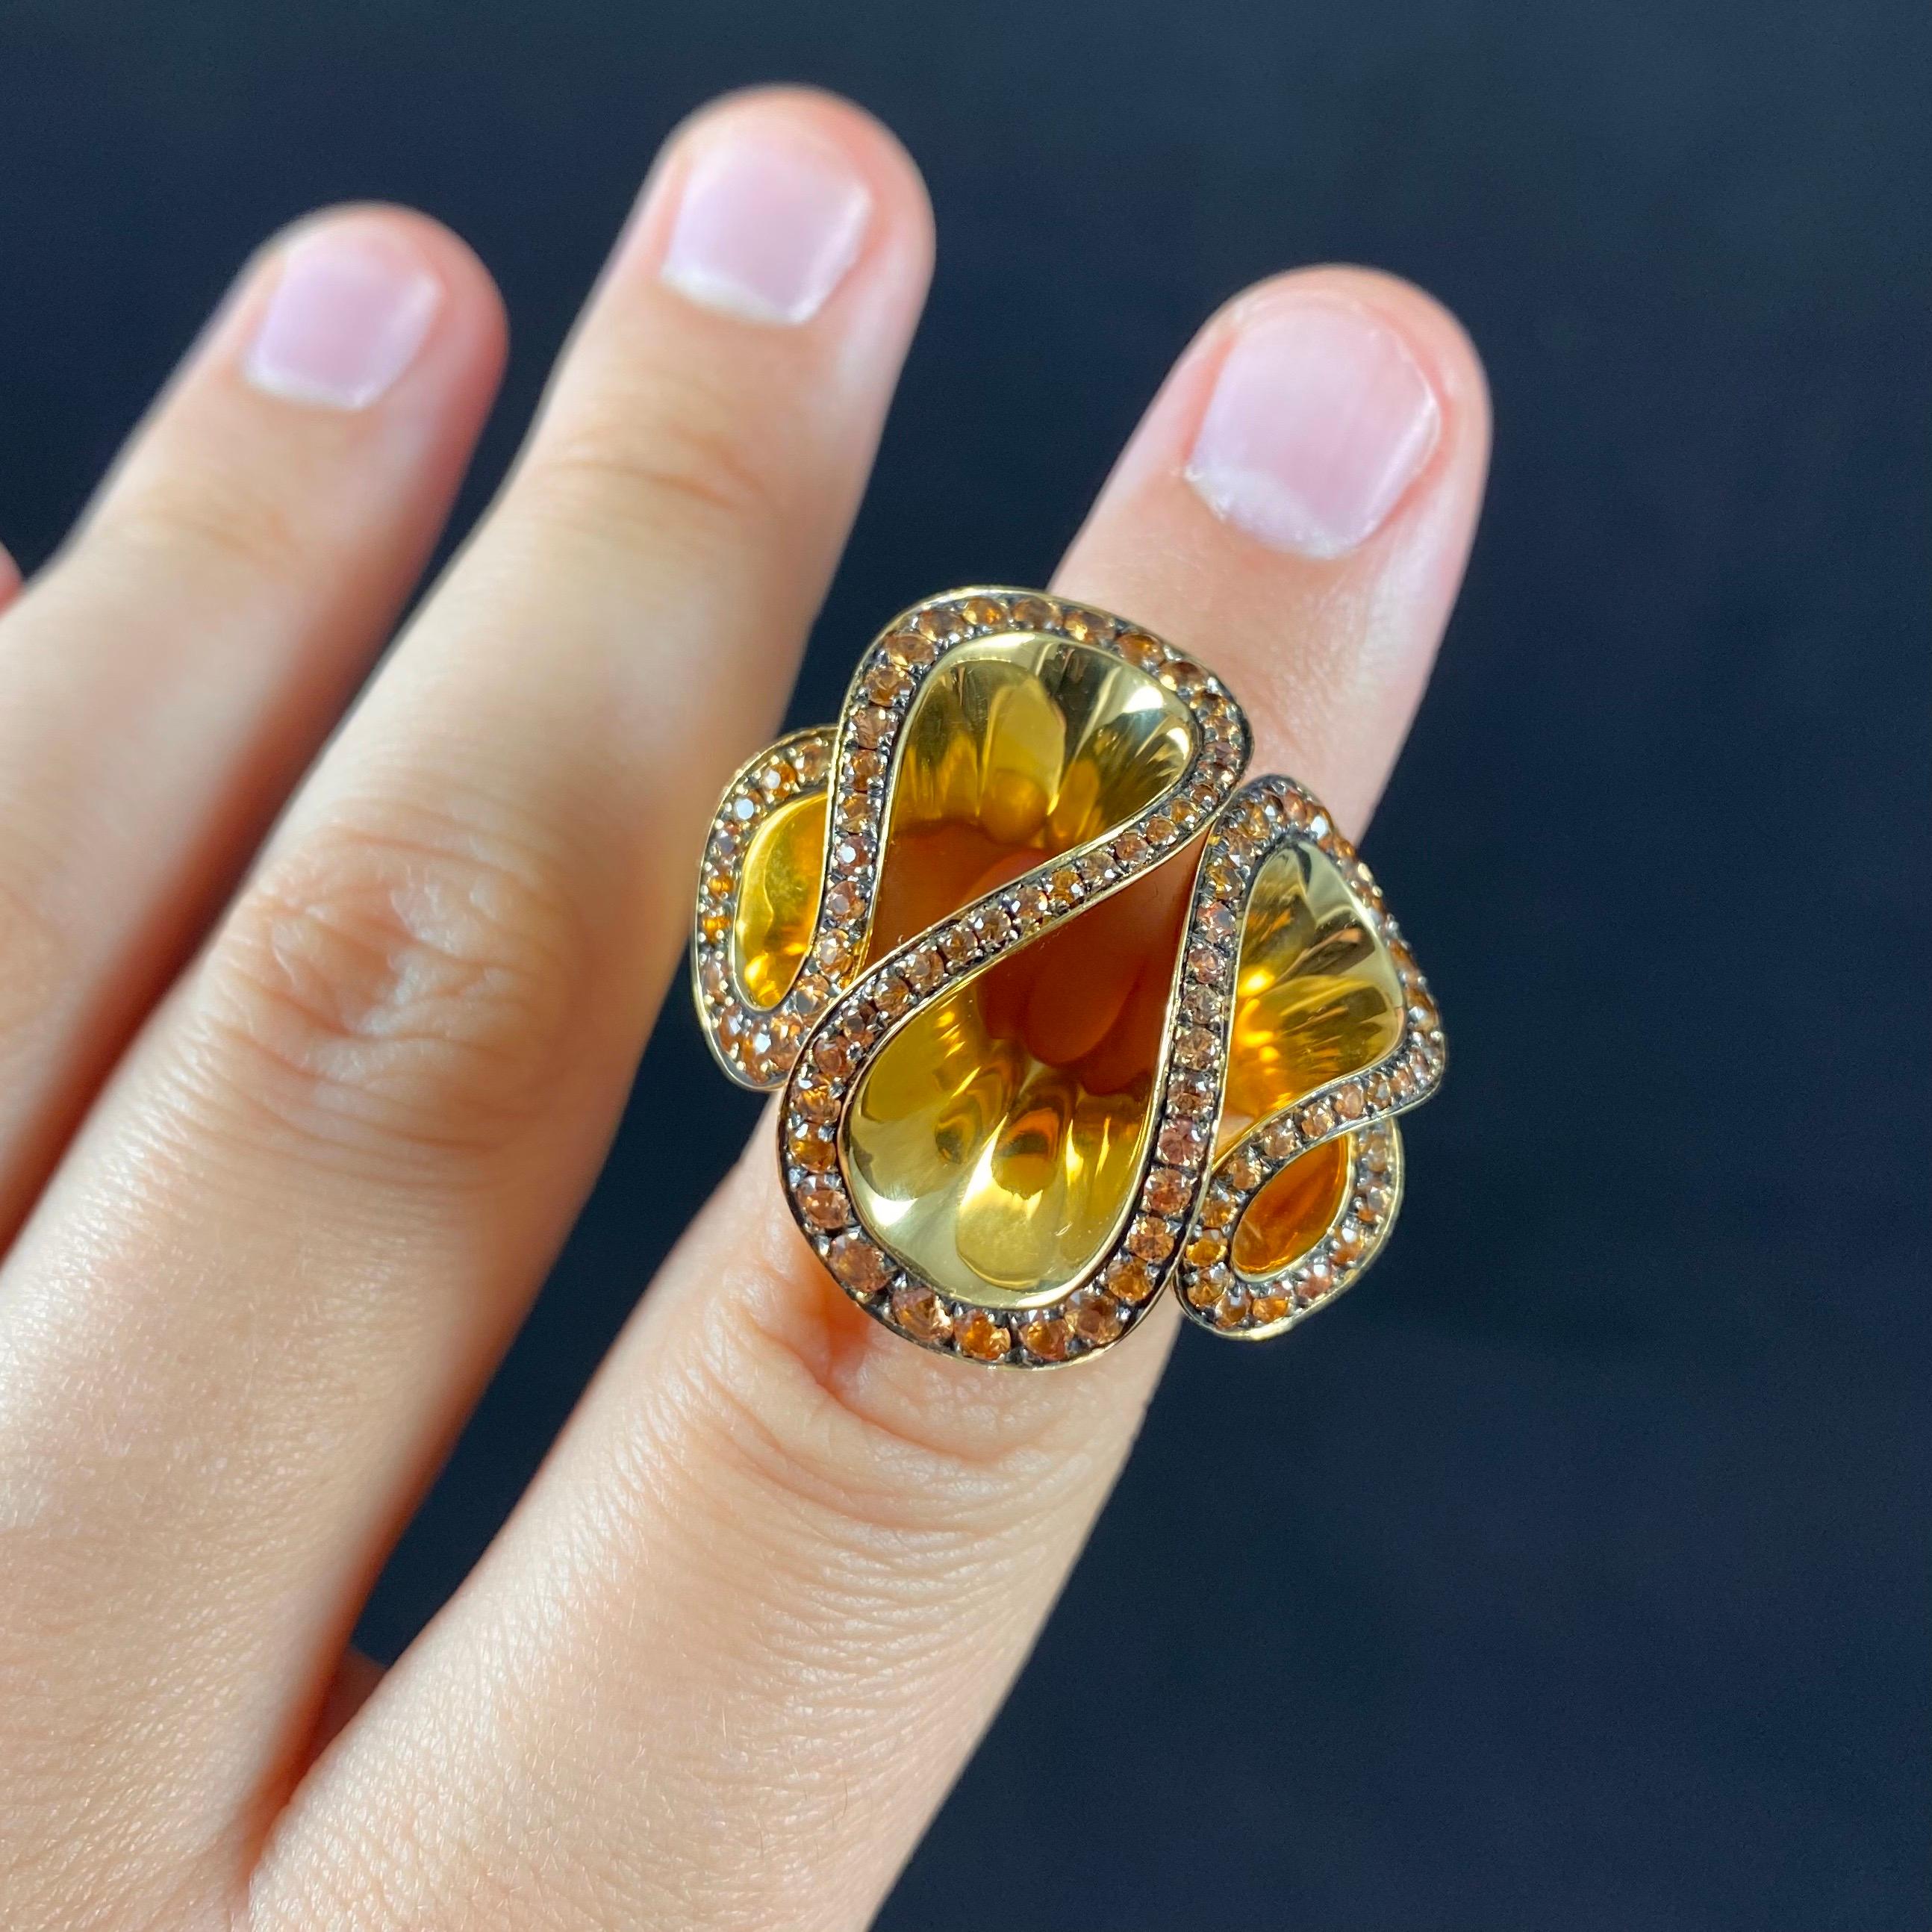 de GRISOGONO Zingana Round Yellow Sapphire Abstract Cocktail Ring Yellow Gold For Sale 3